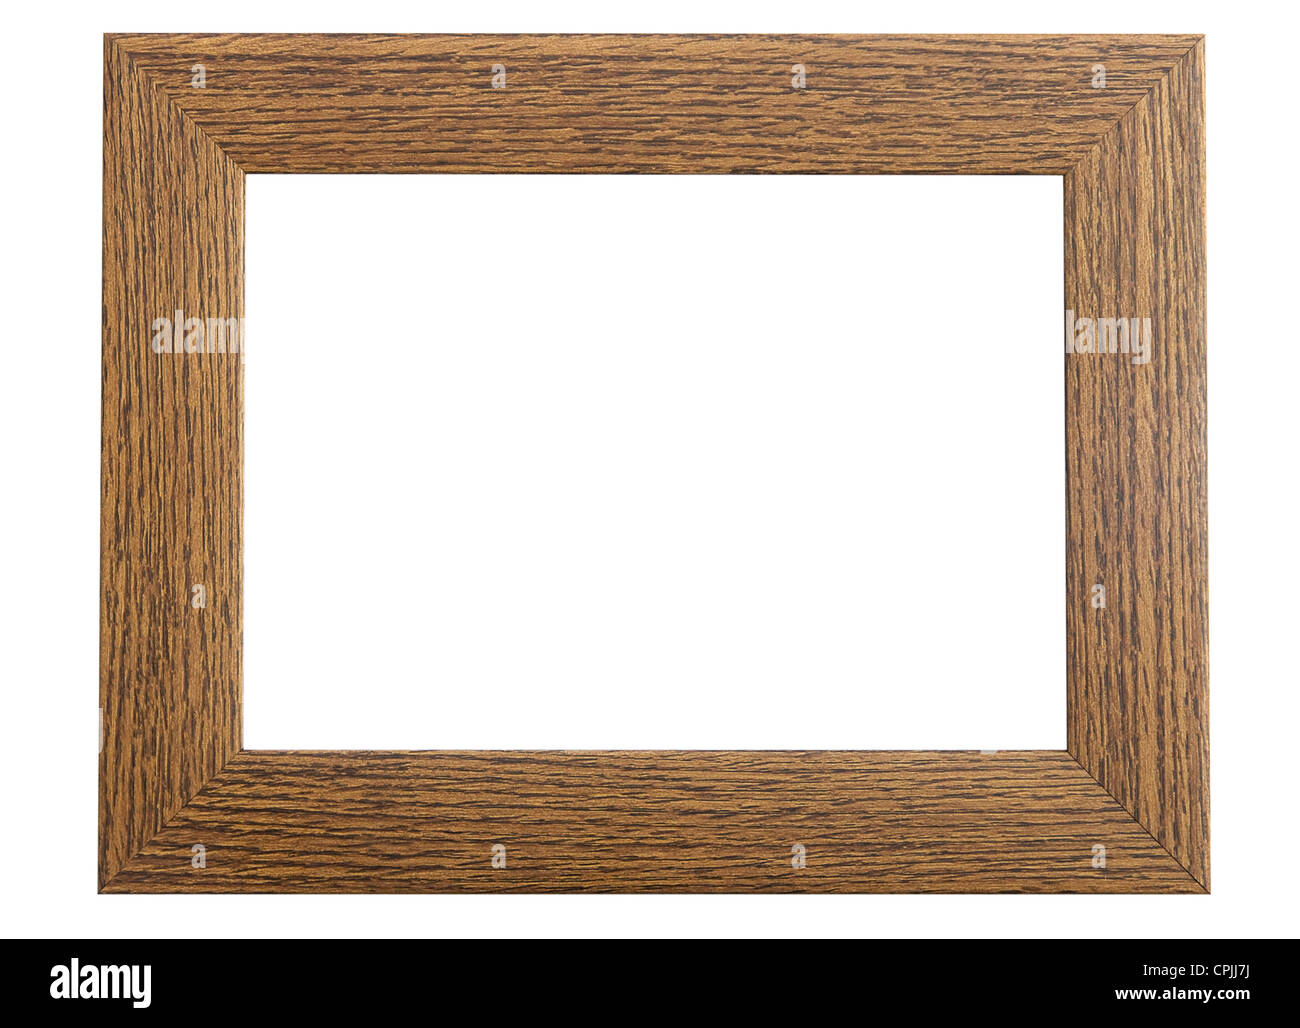 A Colourful Photo of an Isolated Wooden Picture Frame Stock Photo